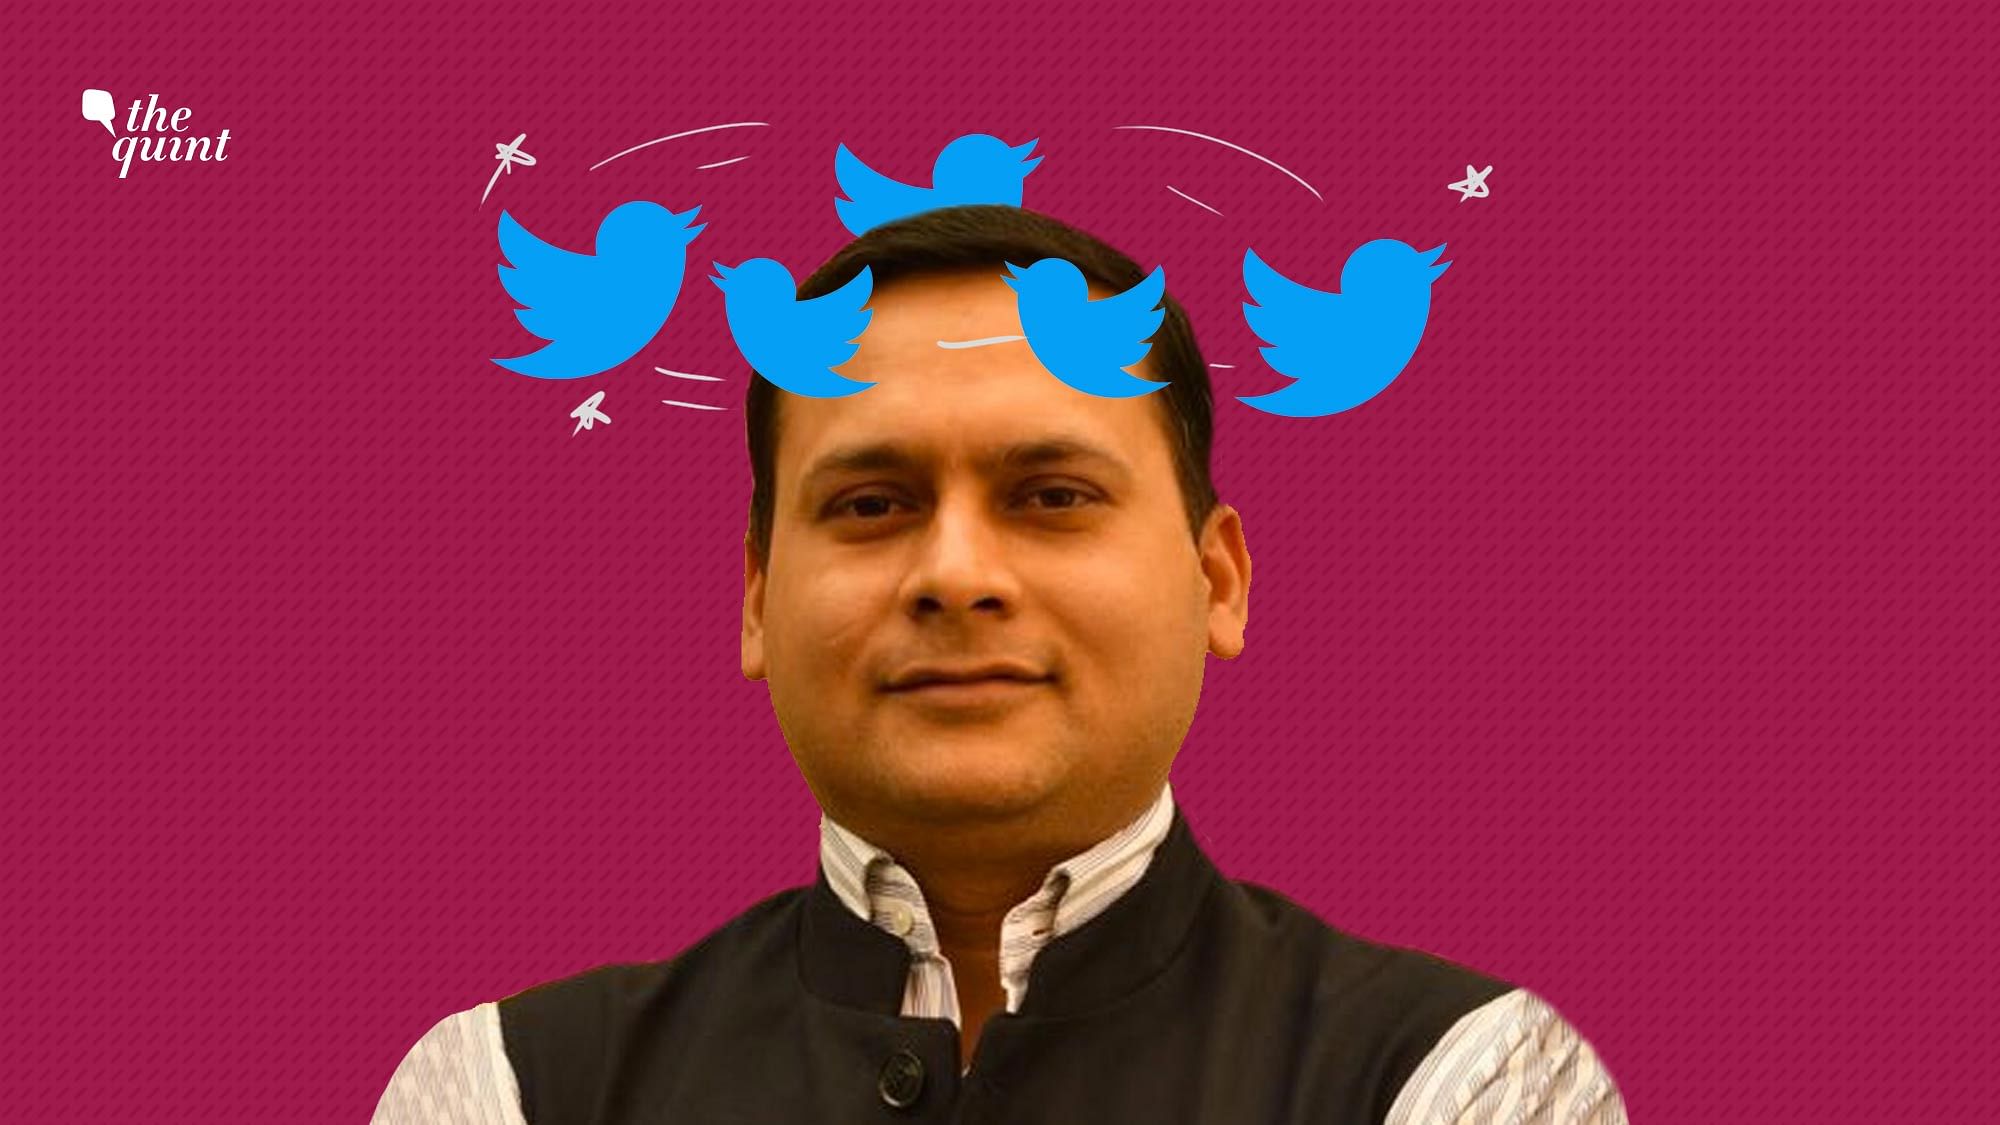 Image of BJP IT Cell Head, Amit Malviya, used for representational purposes.